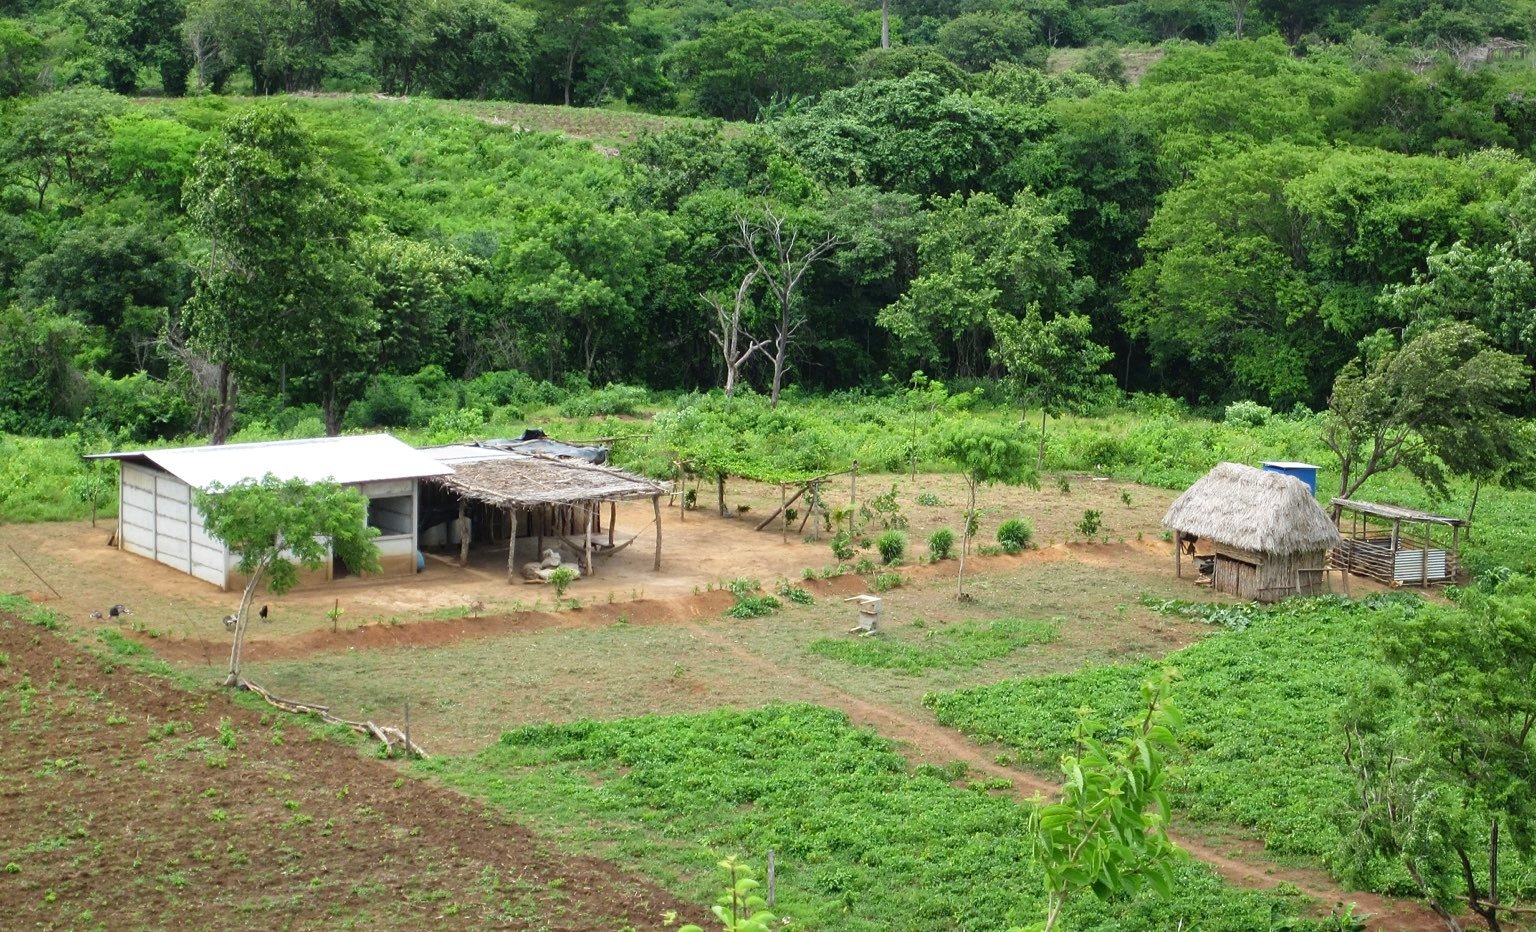 A rural family homestead. Chickens on the patio, small fields foreground, jungle backdrop.